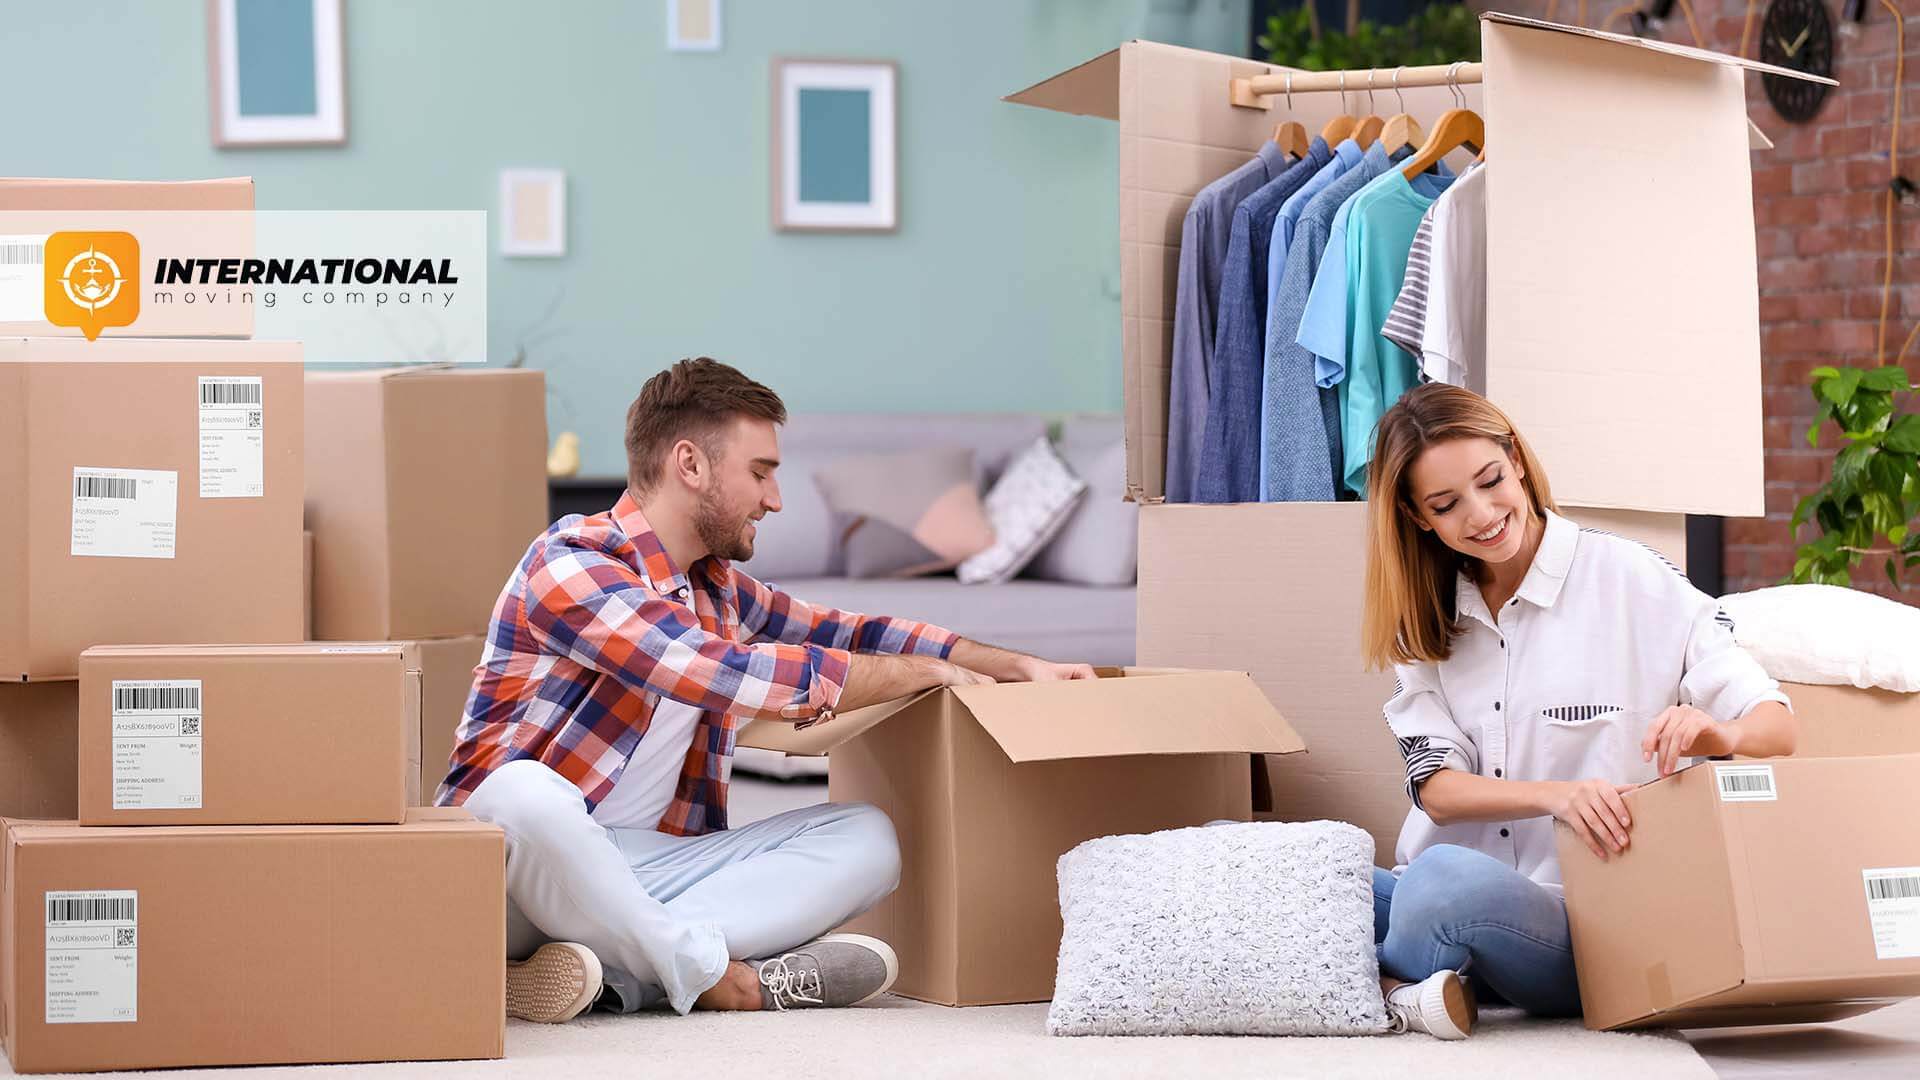 A man and a woman sitting surrounded by boxes International Moving Company logo